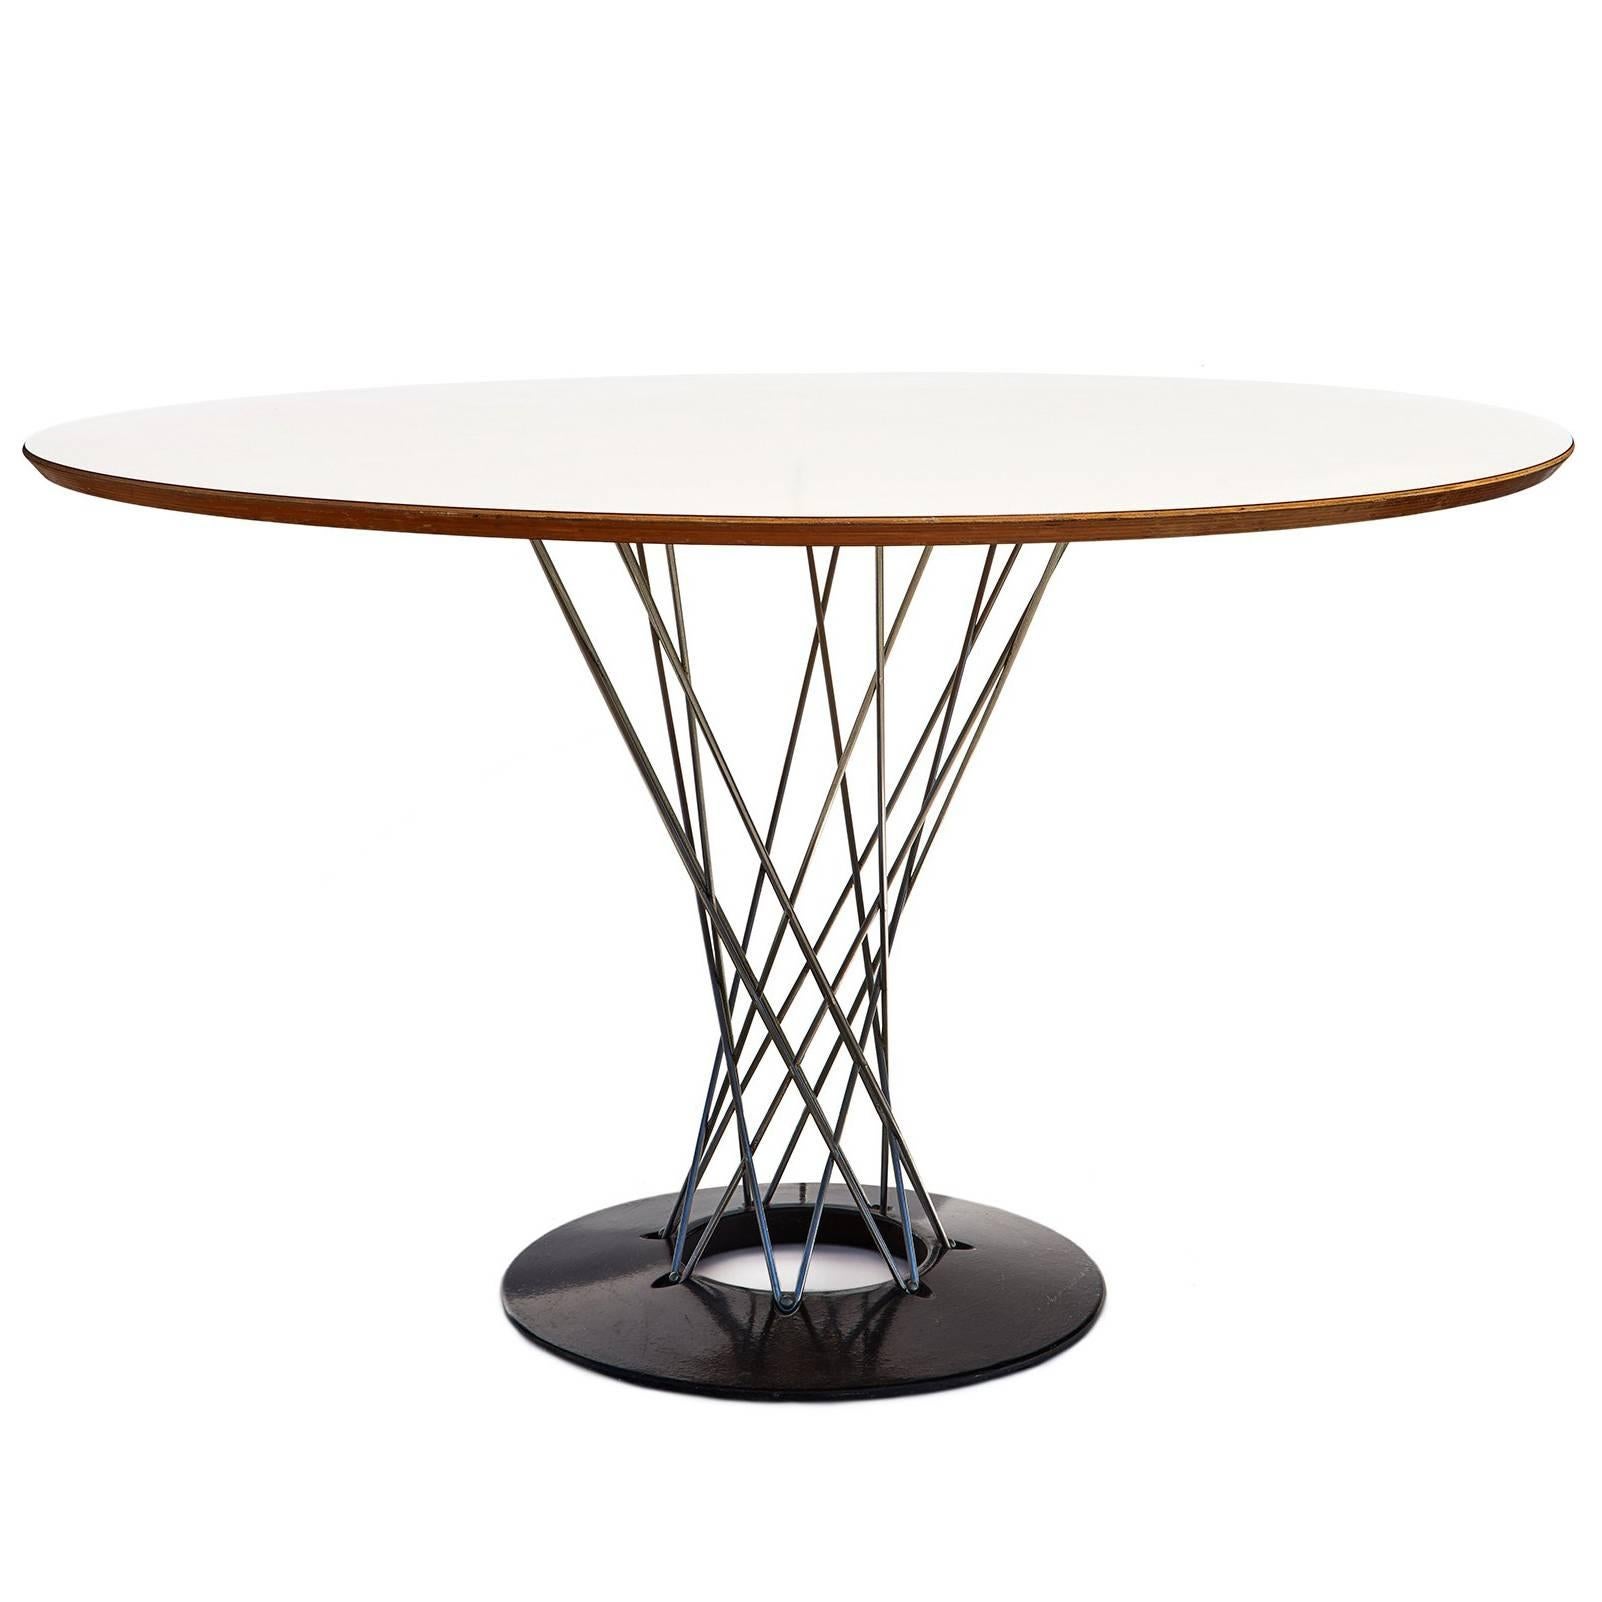 Early 1960s "Cyclone" Dining Table by Isamu Noguchi